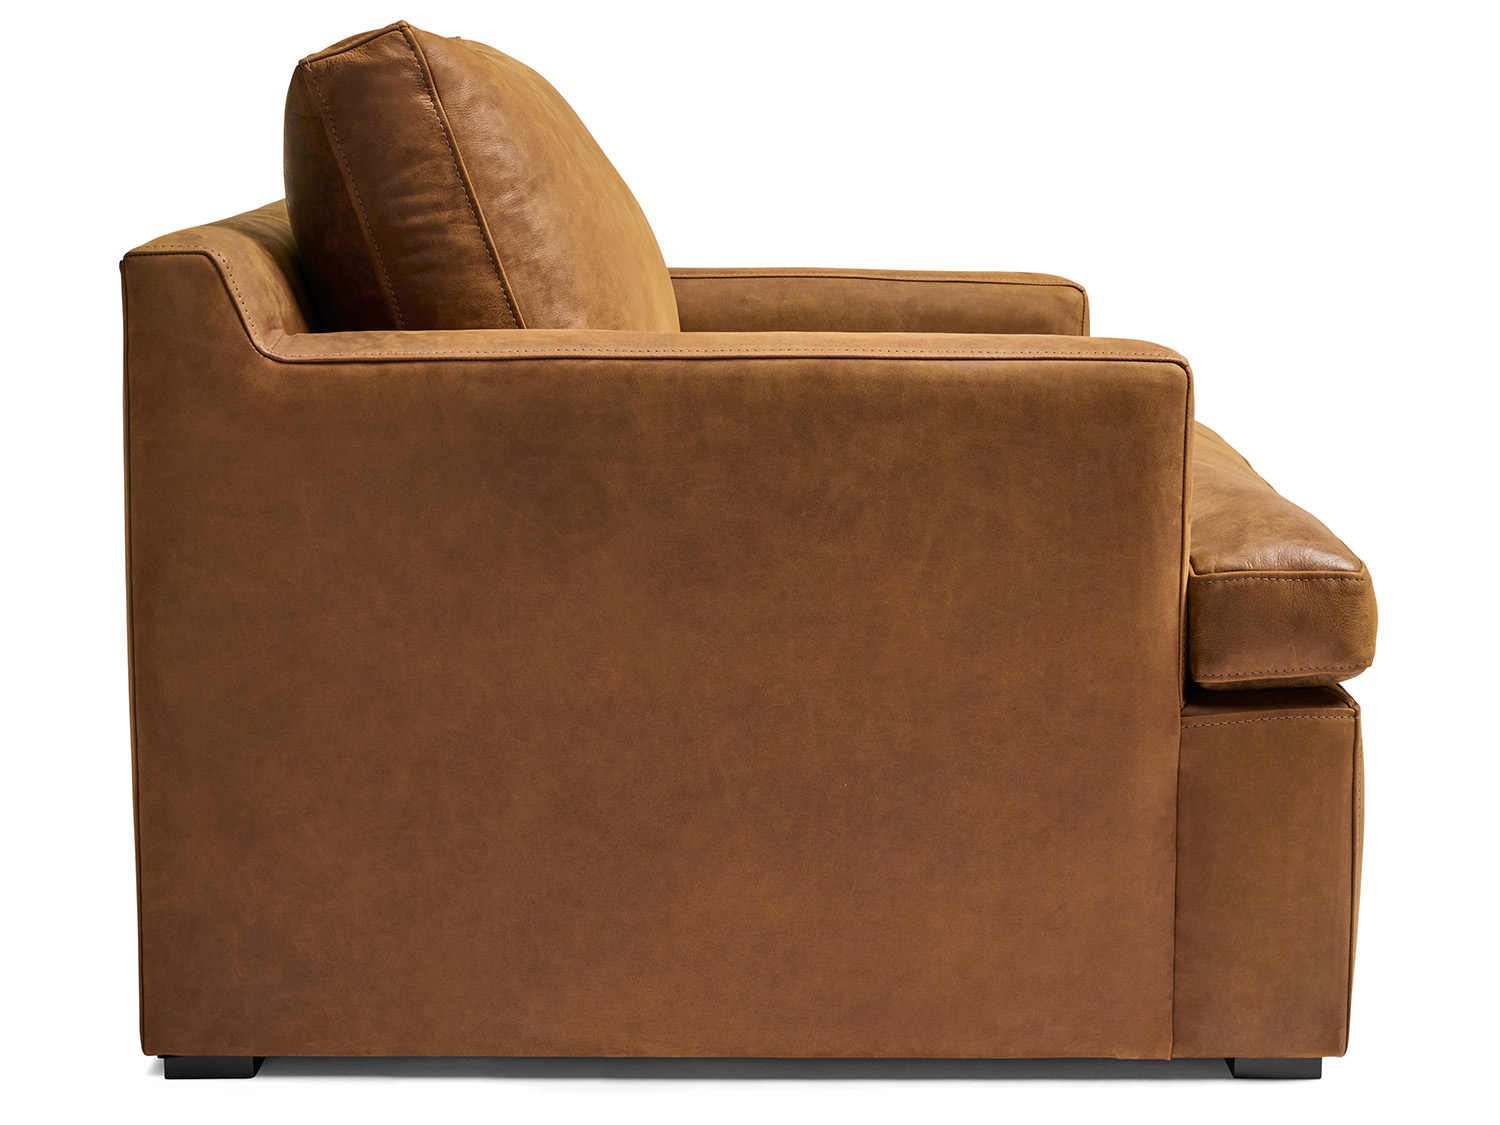 In Stock 96 x 40 Muir Track Arm Leather Sofa in Full Aniline Burnham Sycamore Nubuck Leather - side